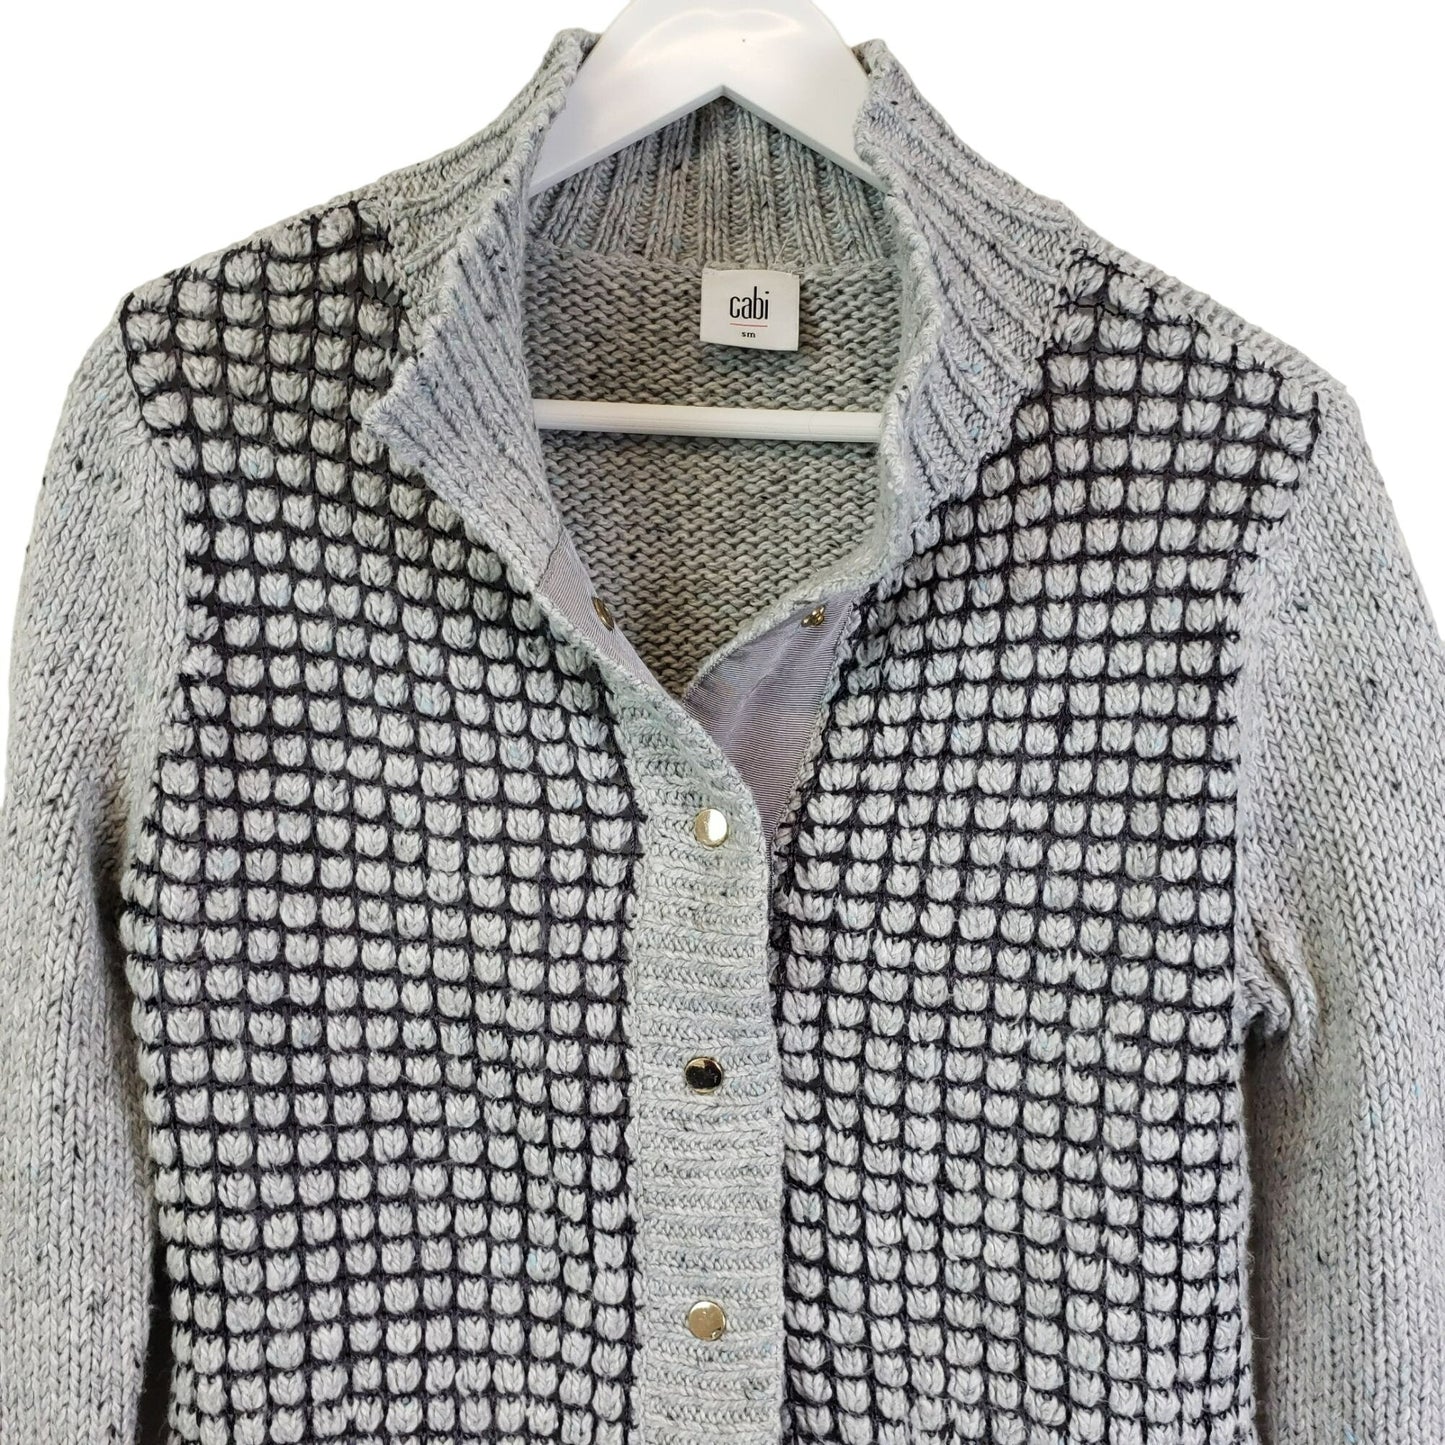 Cabi Square Stitched Snap Front Cardigan Sweater Size Small